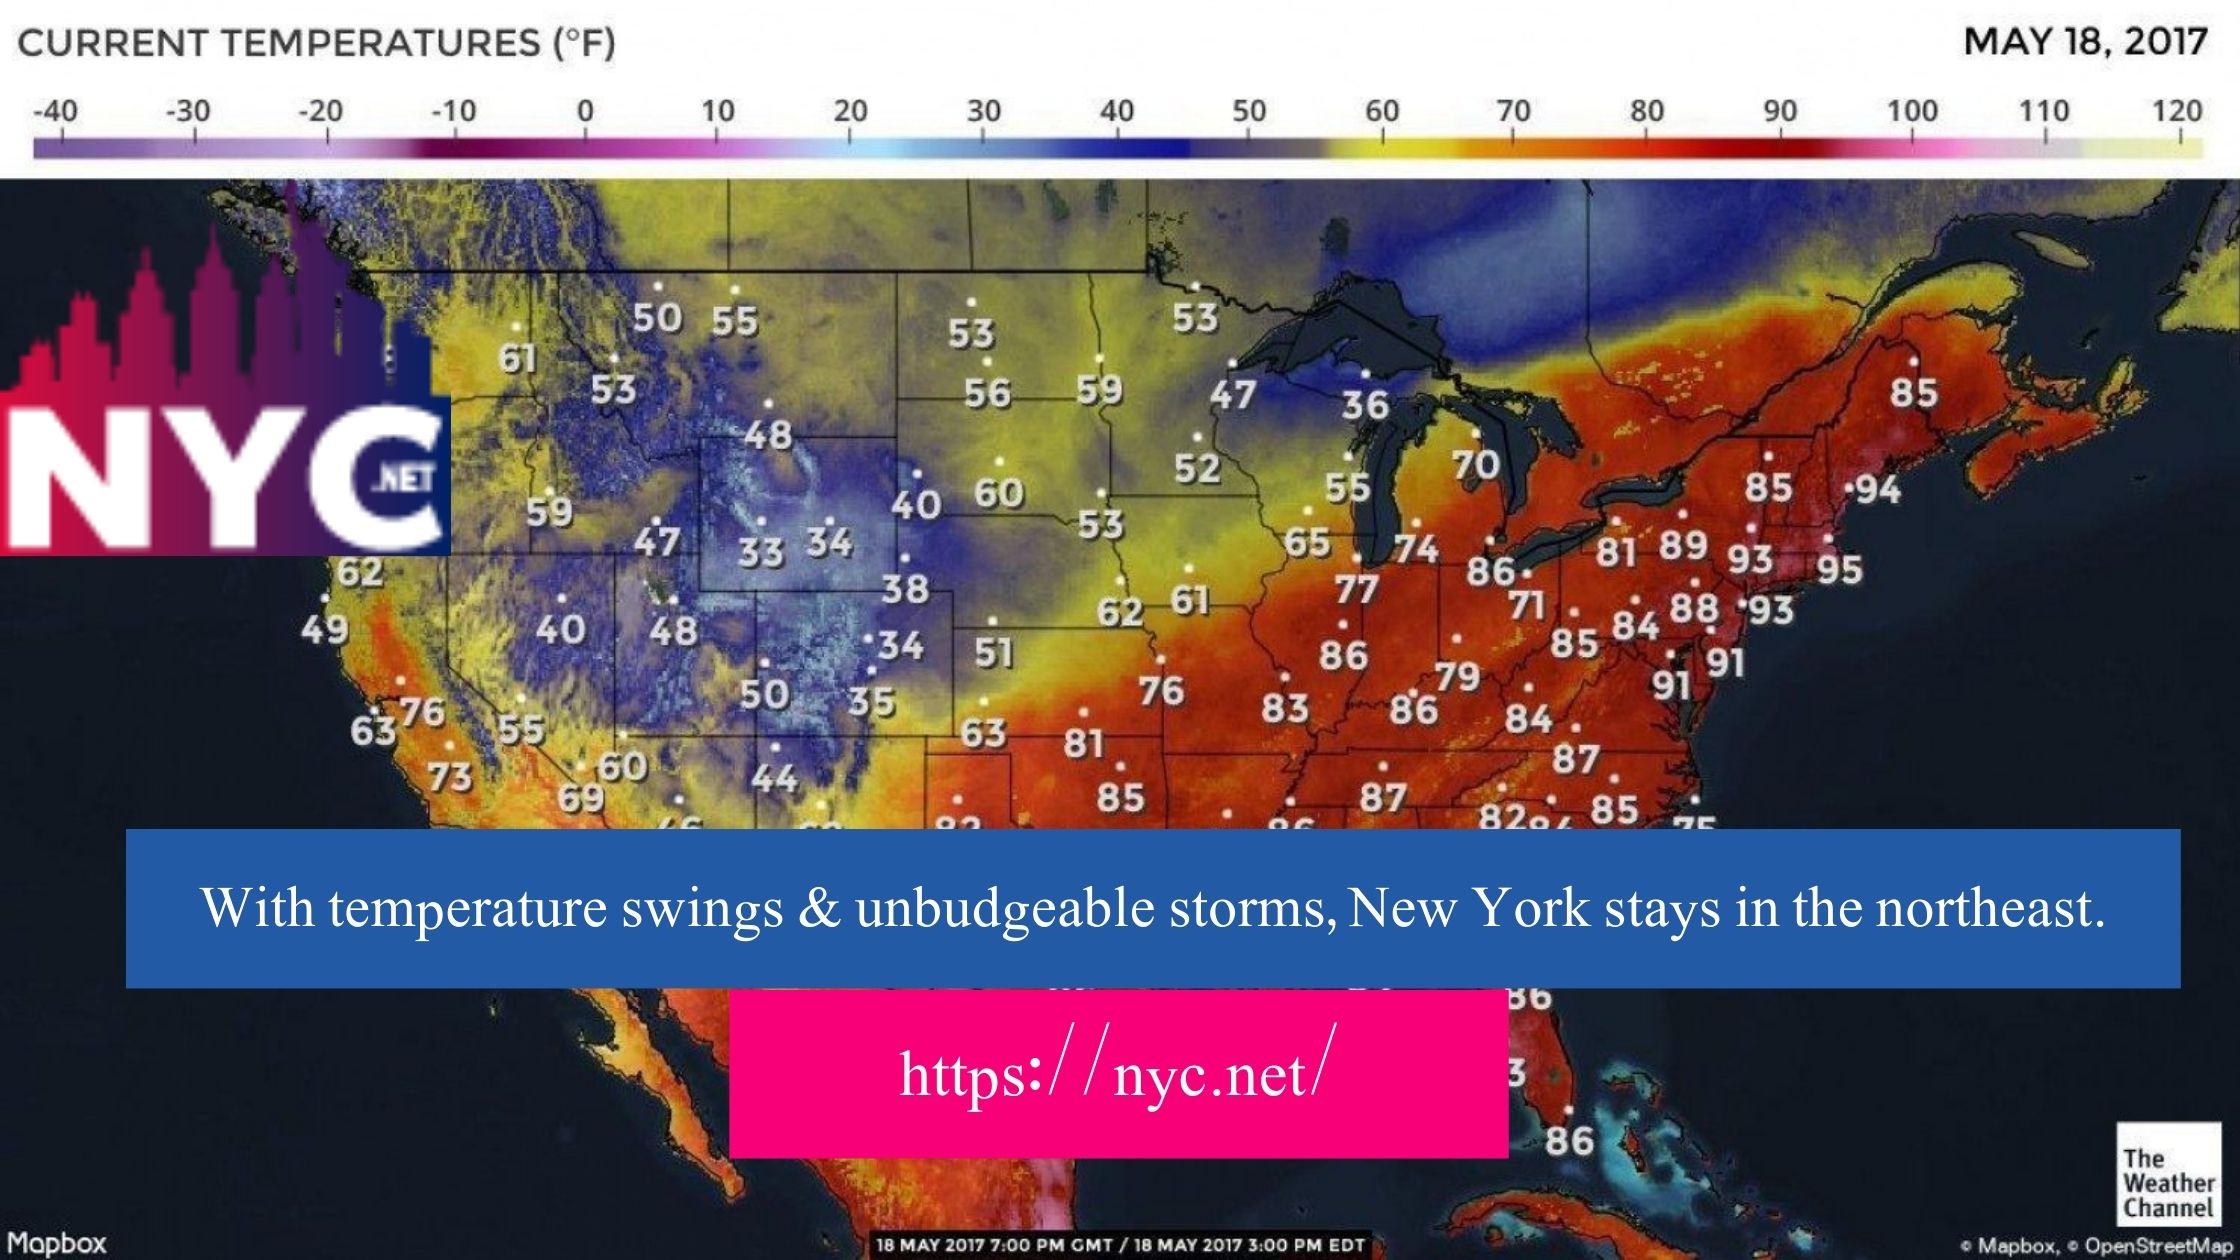 With temperature swings & unbudgeable storms, New York stays in the northeast.